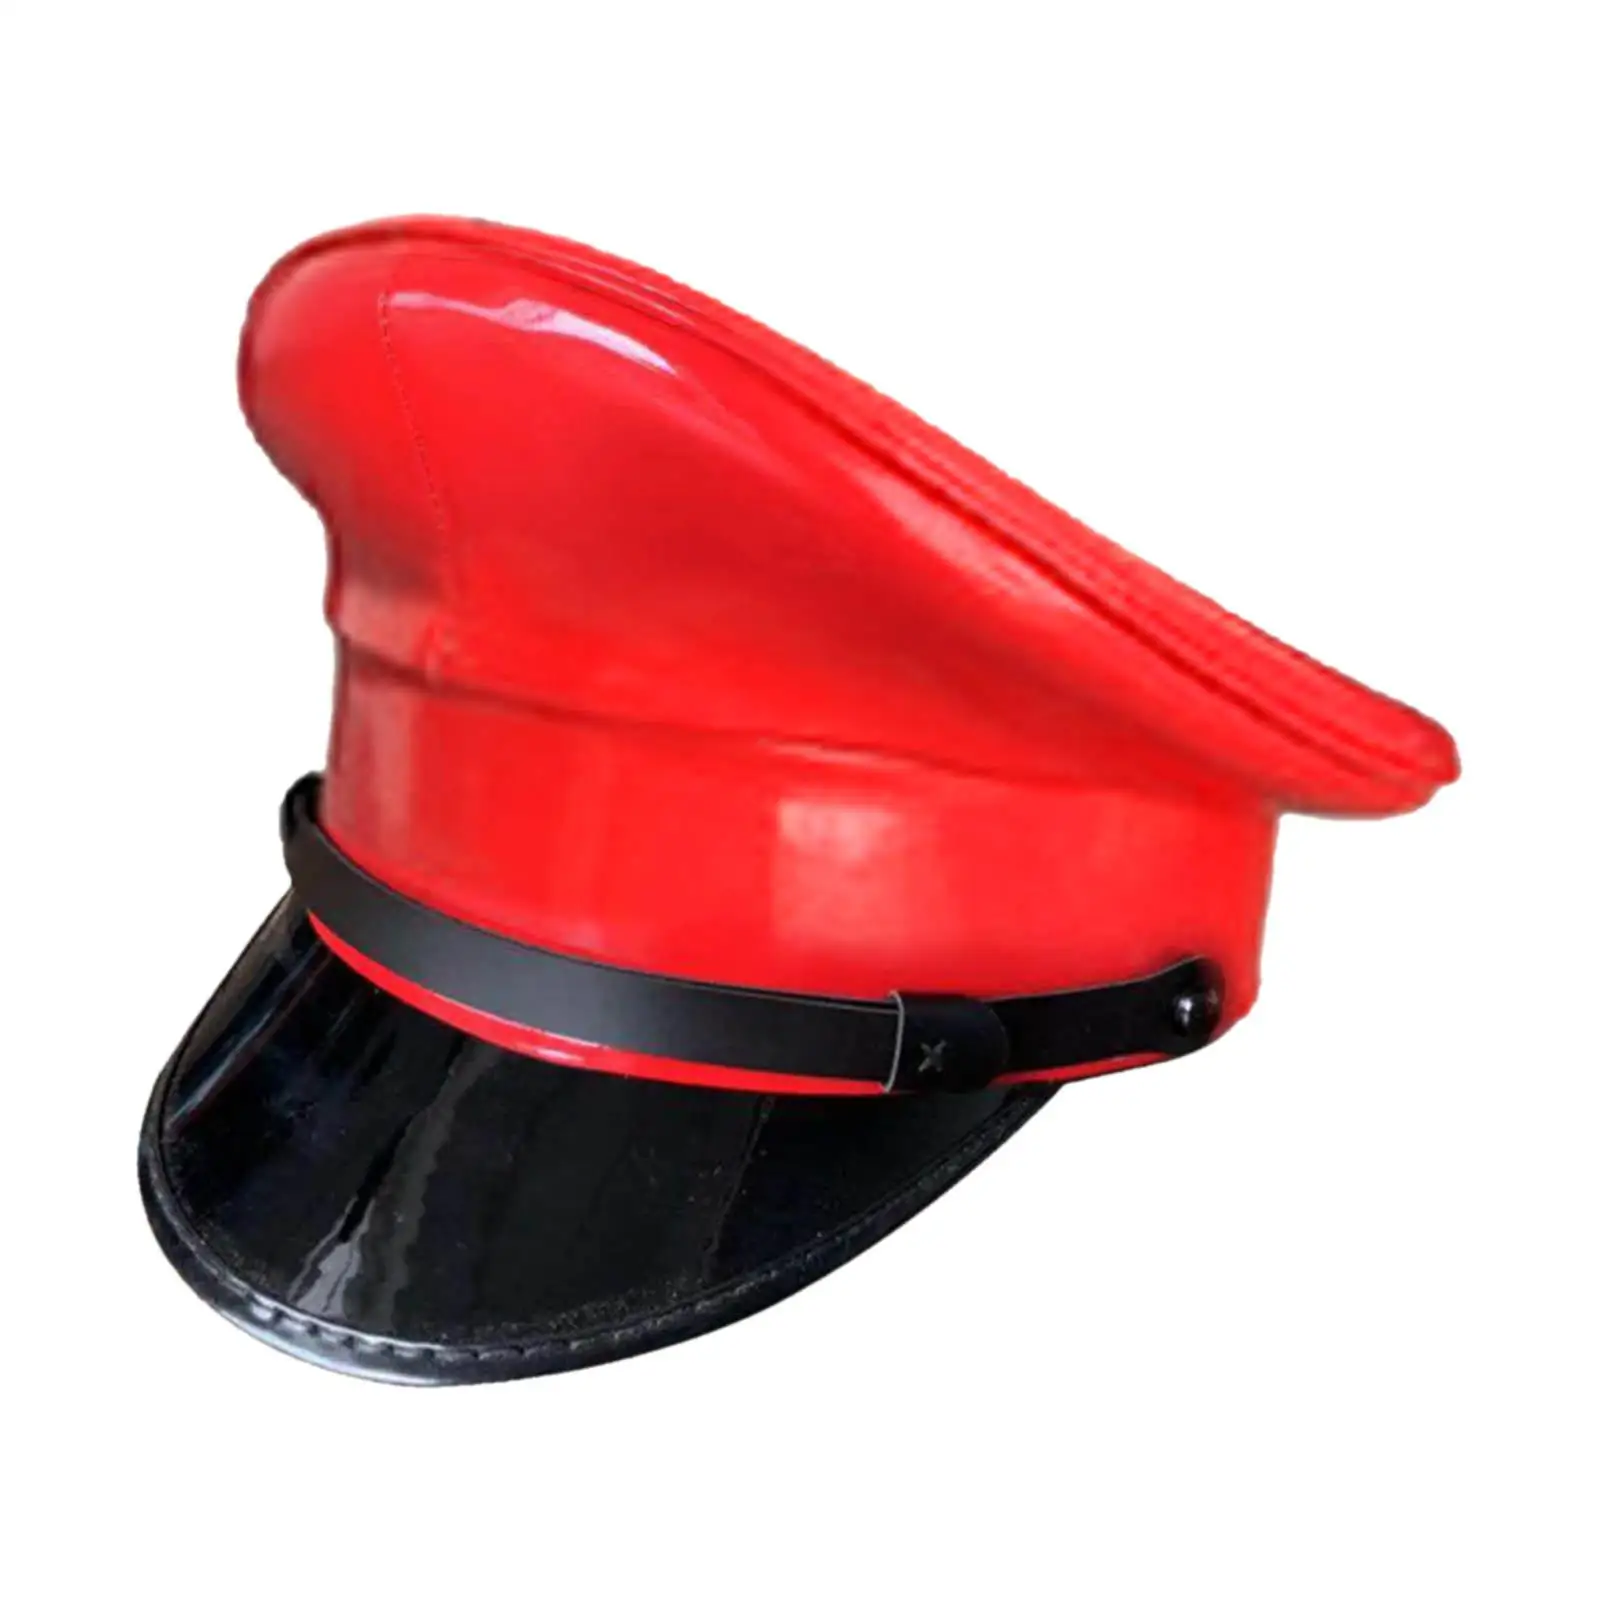 Captain Hat Uniform Deluxe Props PU Leather Security Guard Hat Guard Hat for Stage Performance Nightclub Cosplay Adult Men Women